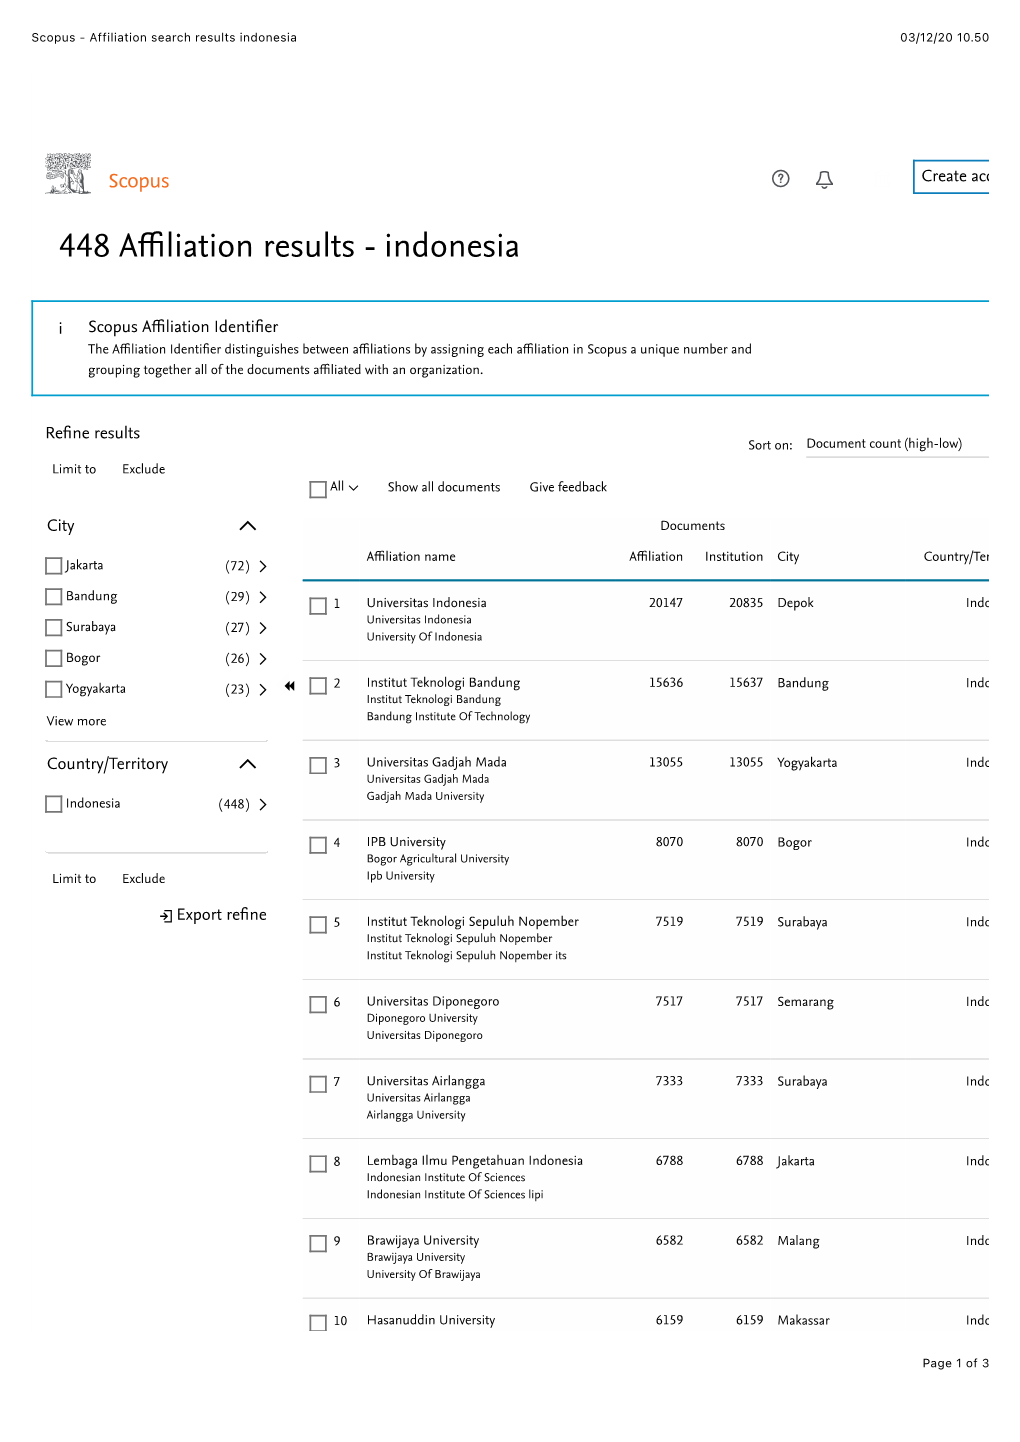 Scopus - Affiliation Search Results Indonesia 03/12/20 10.50